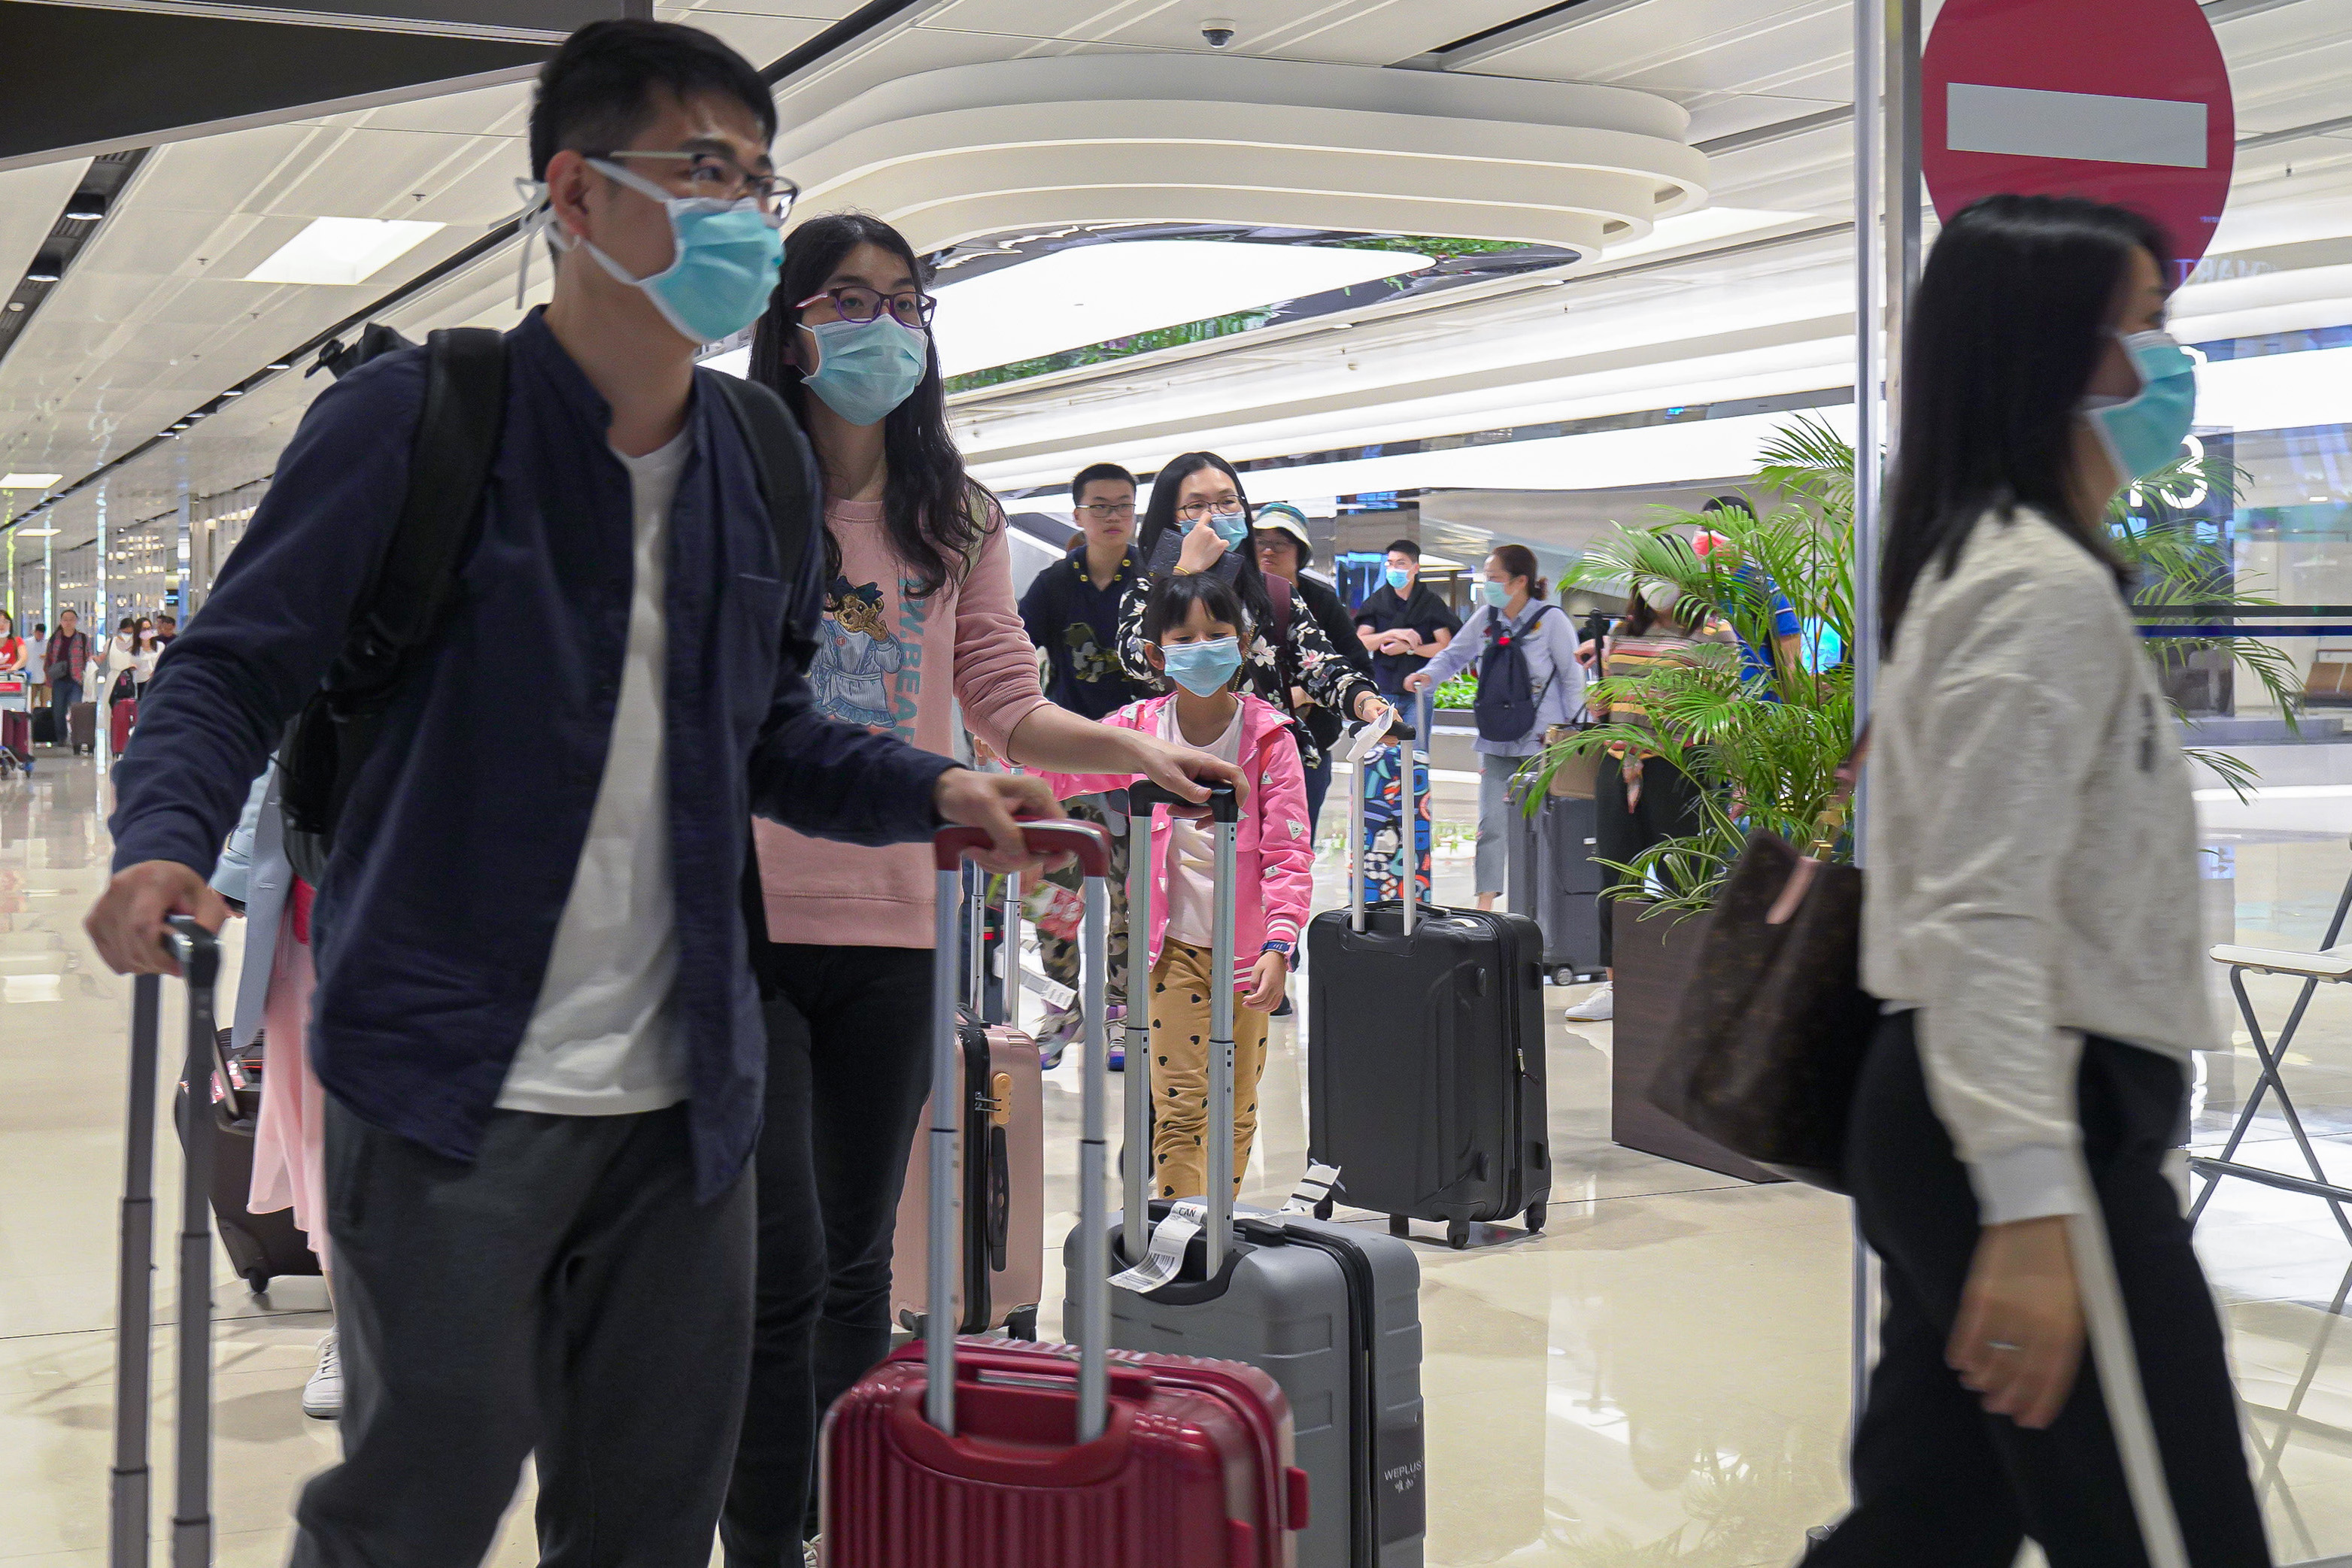  Visitors wearing masks arrive at the departure hall of Changi Airport in Singapore.